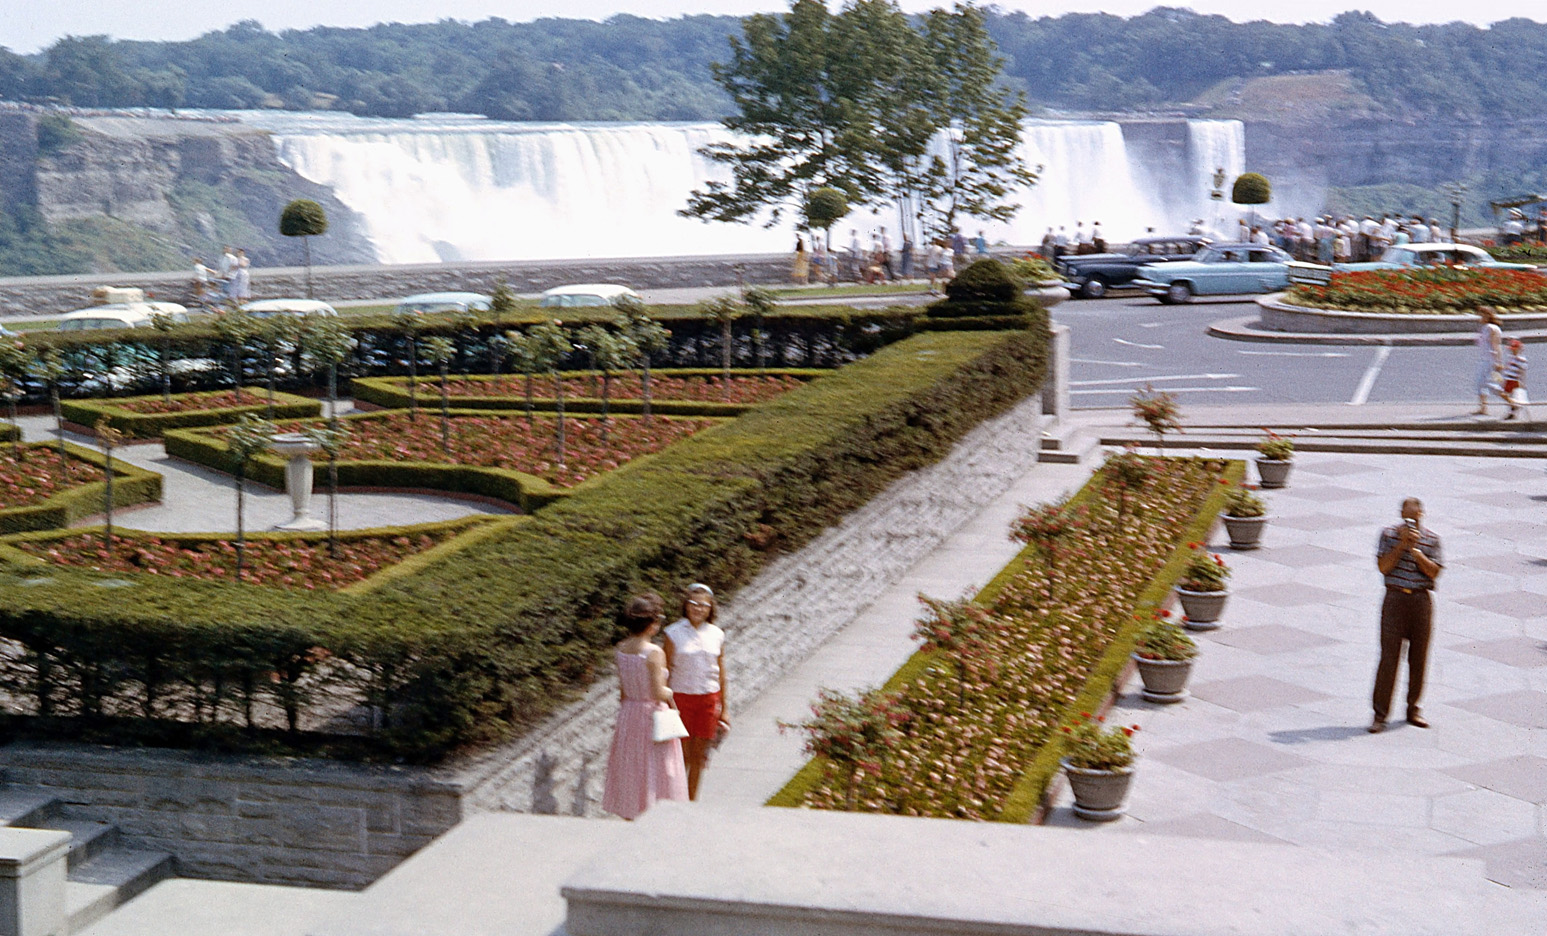 Another photo my Dad took in summer 1958 at Niagara Falls on the Canadian side (a row of autos was in the previous photo I submitted). Although somewhat fuzzy, it shows the period well. At 8 years old, I think I was beside him when he took this shot. The then-recent (1954) slide on the American side is seen again, an event well related by a viewer of the last picture here at Shorpy. View full size.